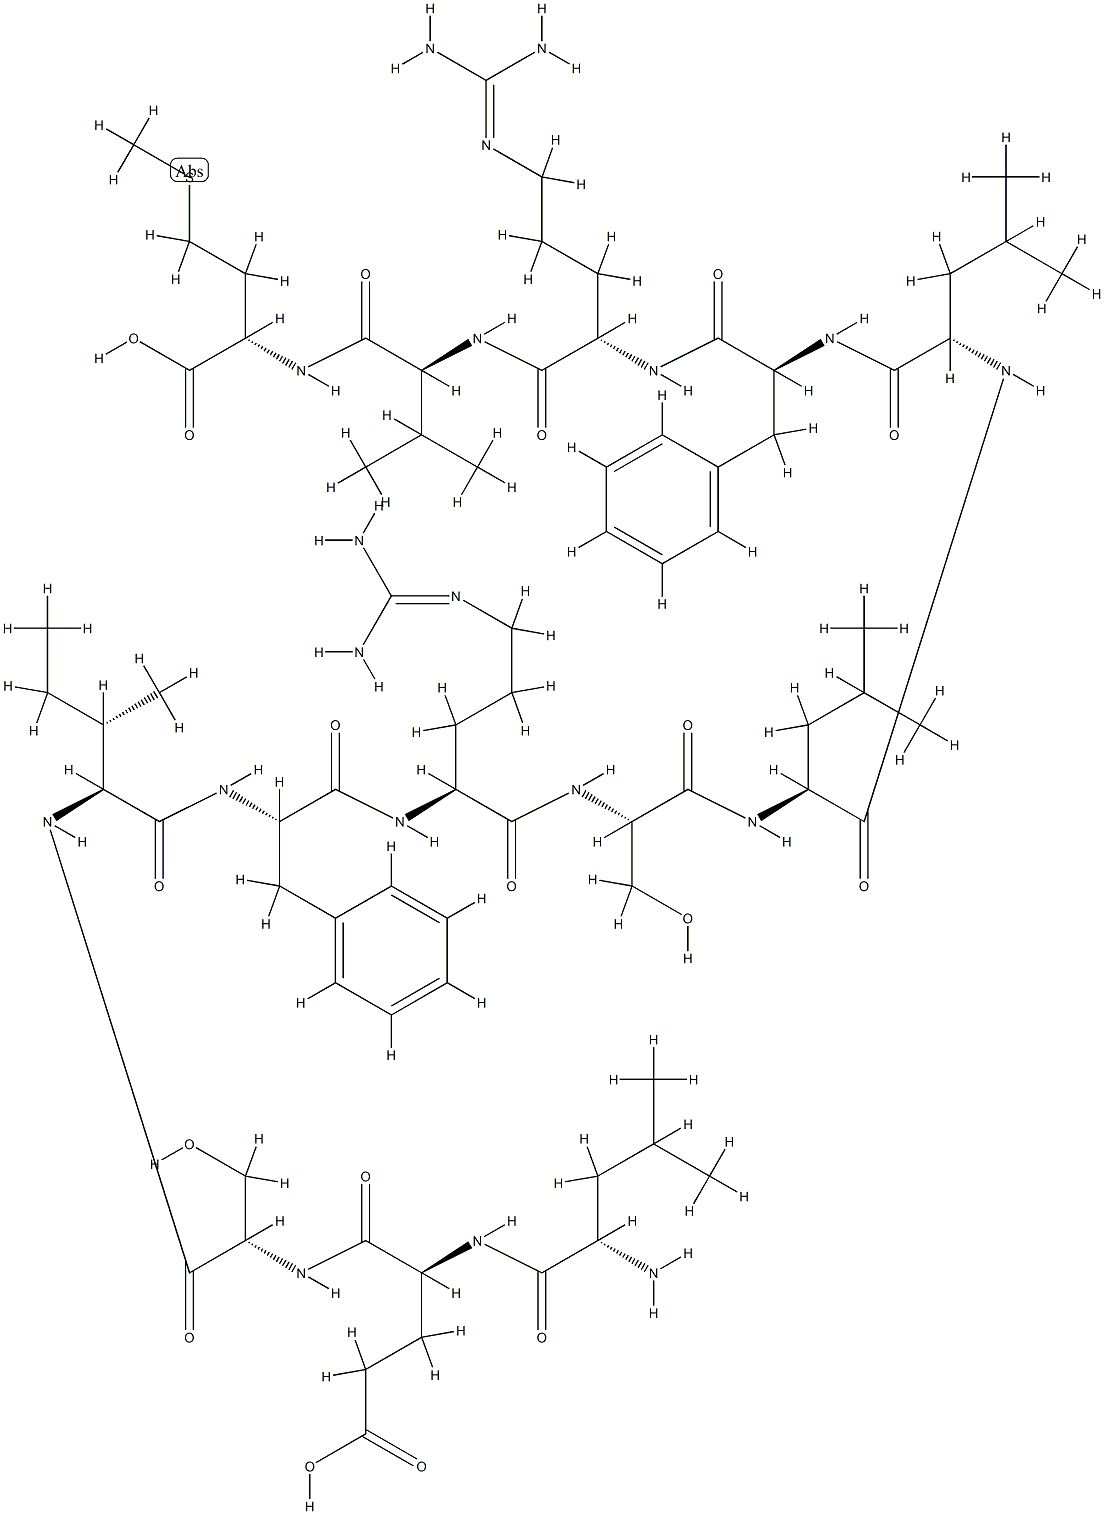 MMK 1 Structure